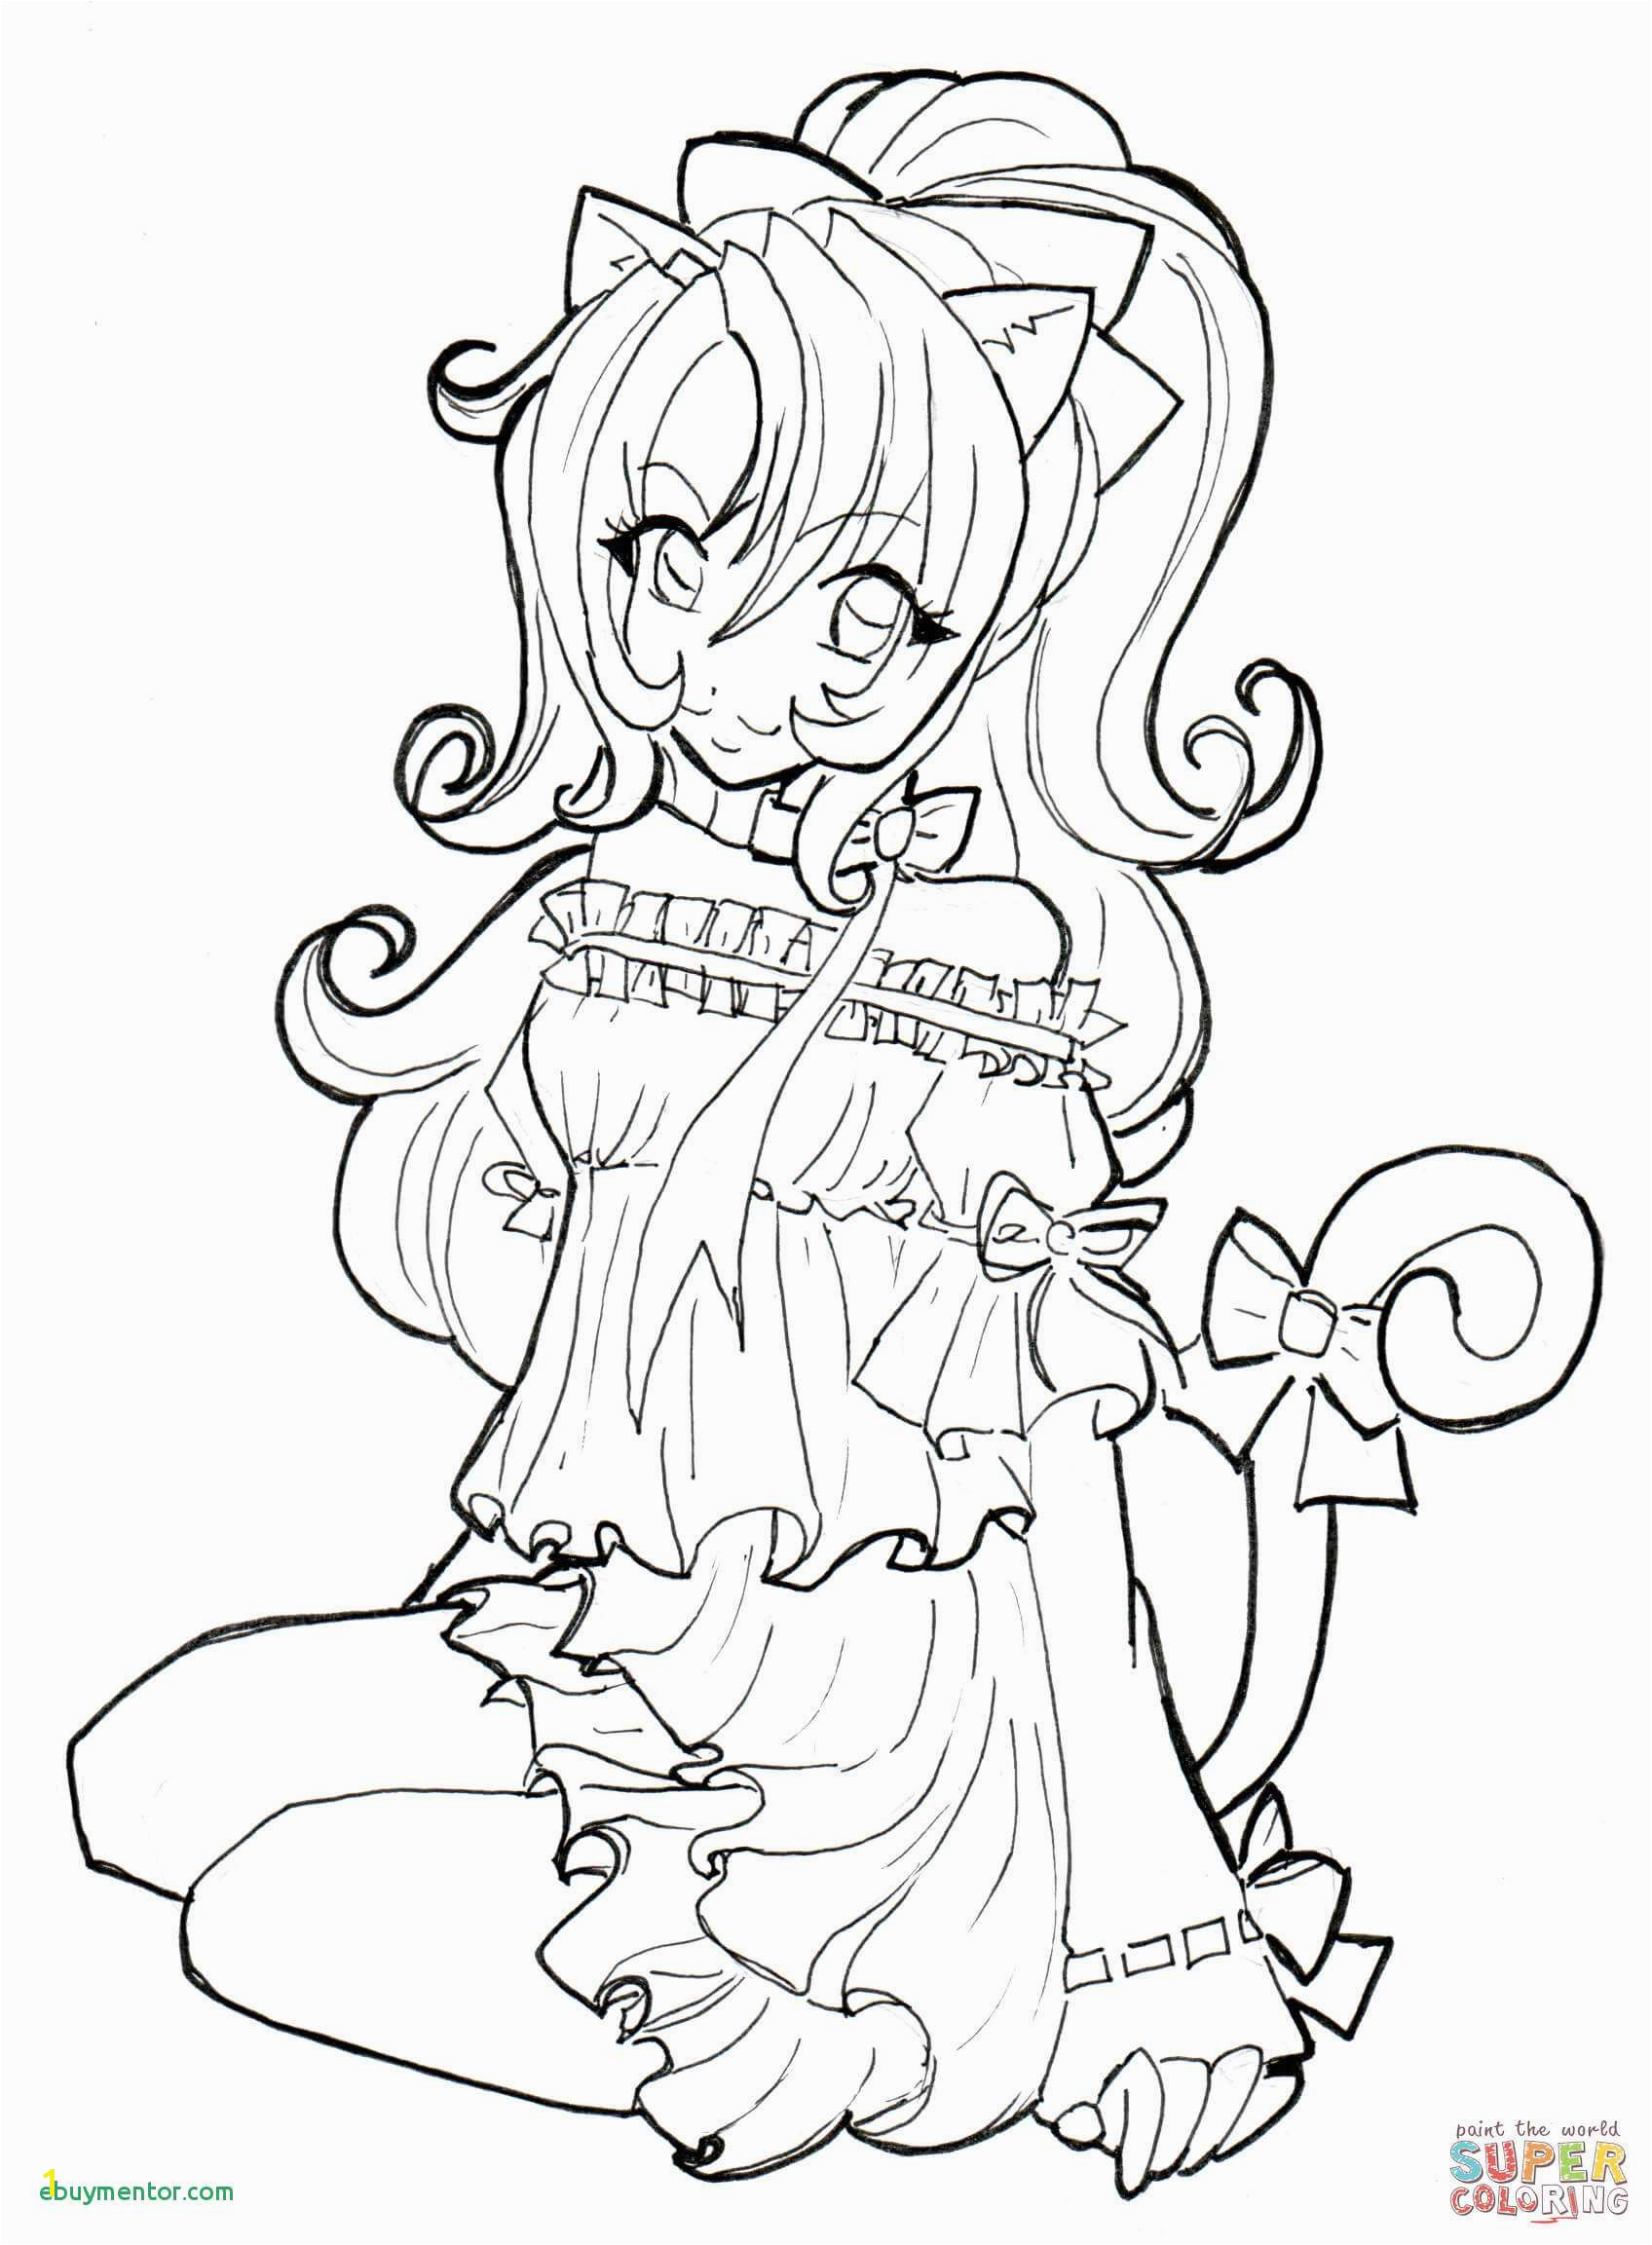 Kawaii Girls Coloring Pages Witch Coloring Page Inspirational Crayola Pages 0d Coloring Page